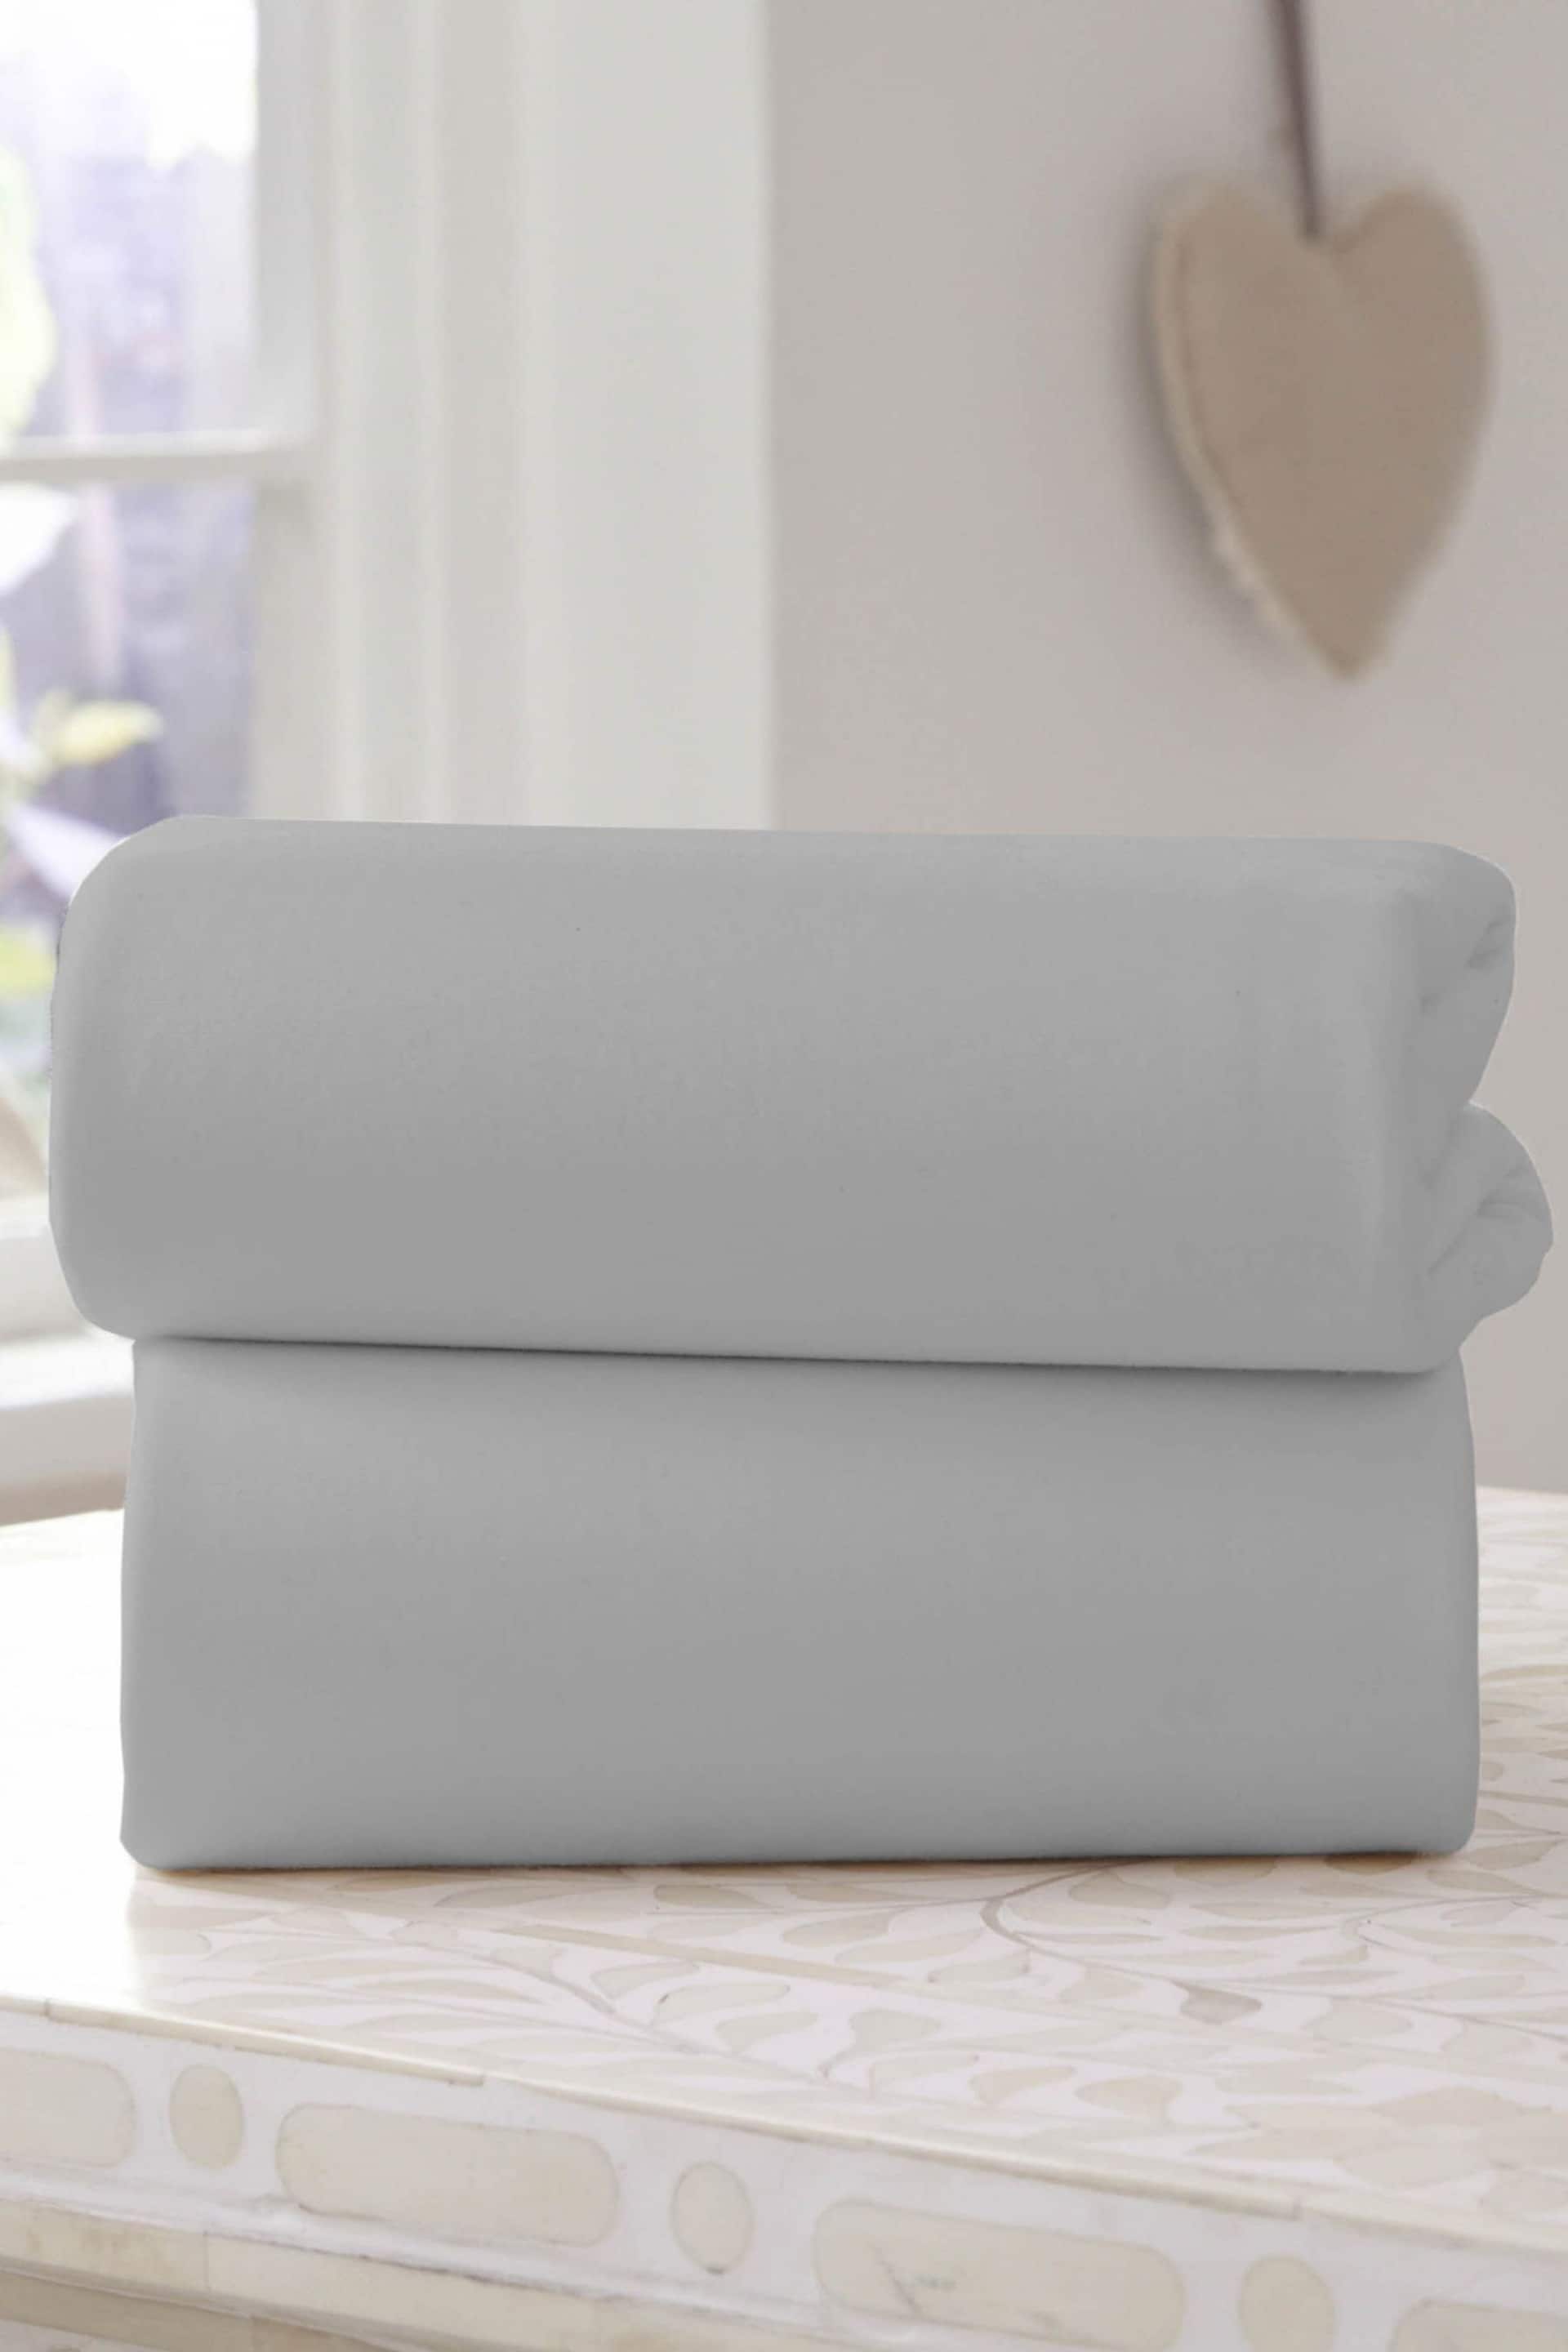 Clair De Lune Grey Travel Fitted Sheet - Image 1 of 3